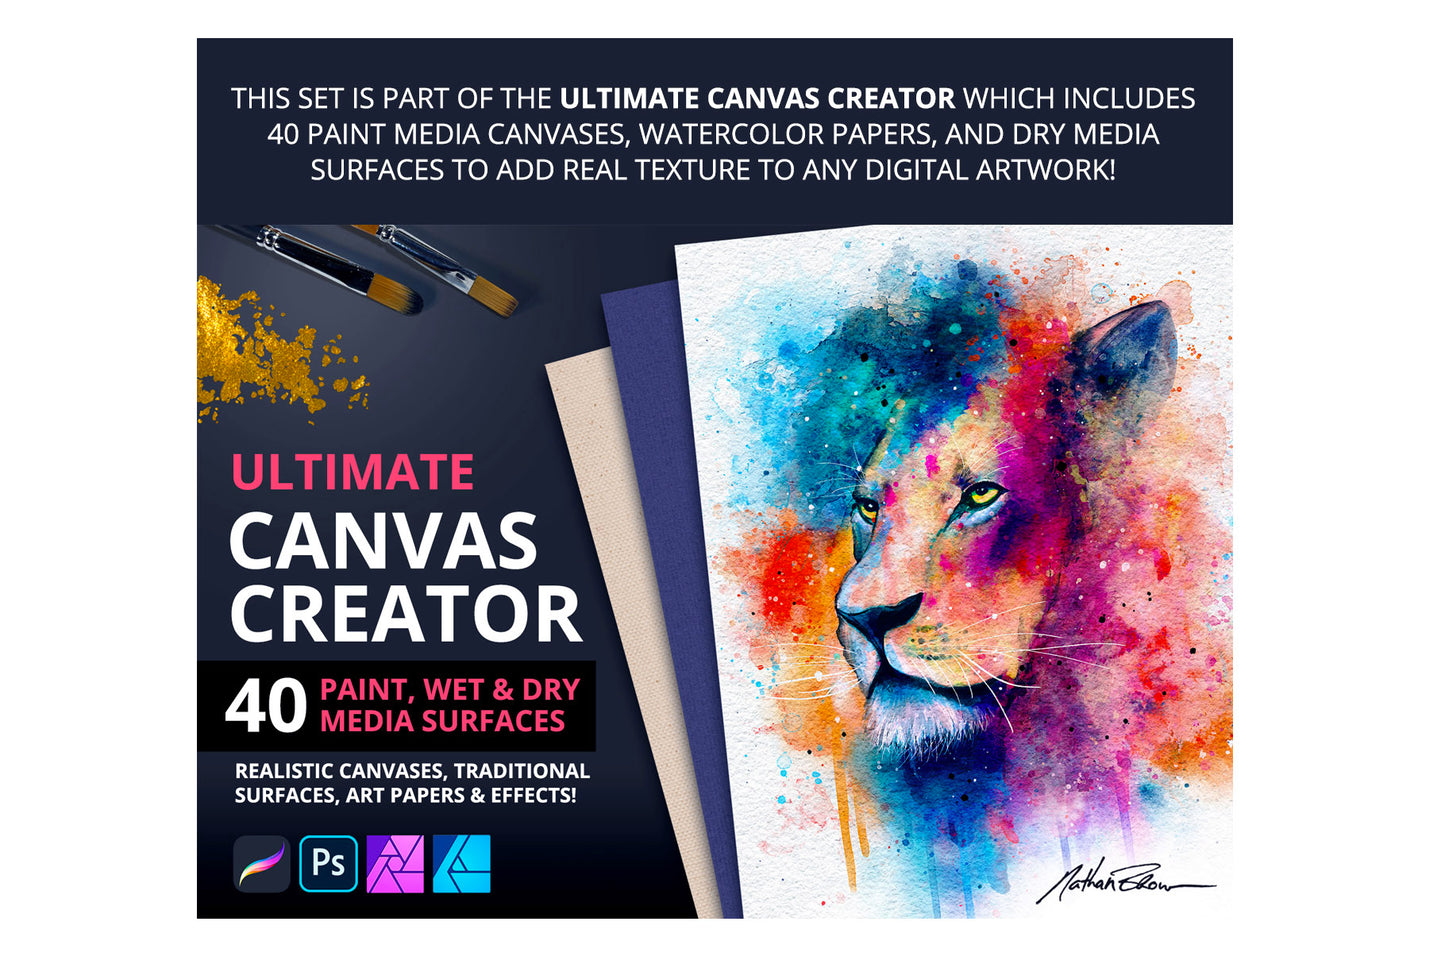 The Ultimate Canvas Creator – Wet Media